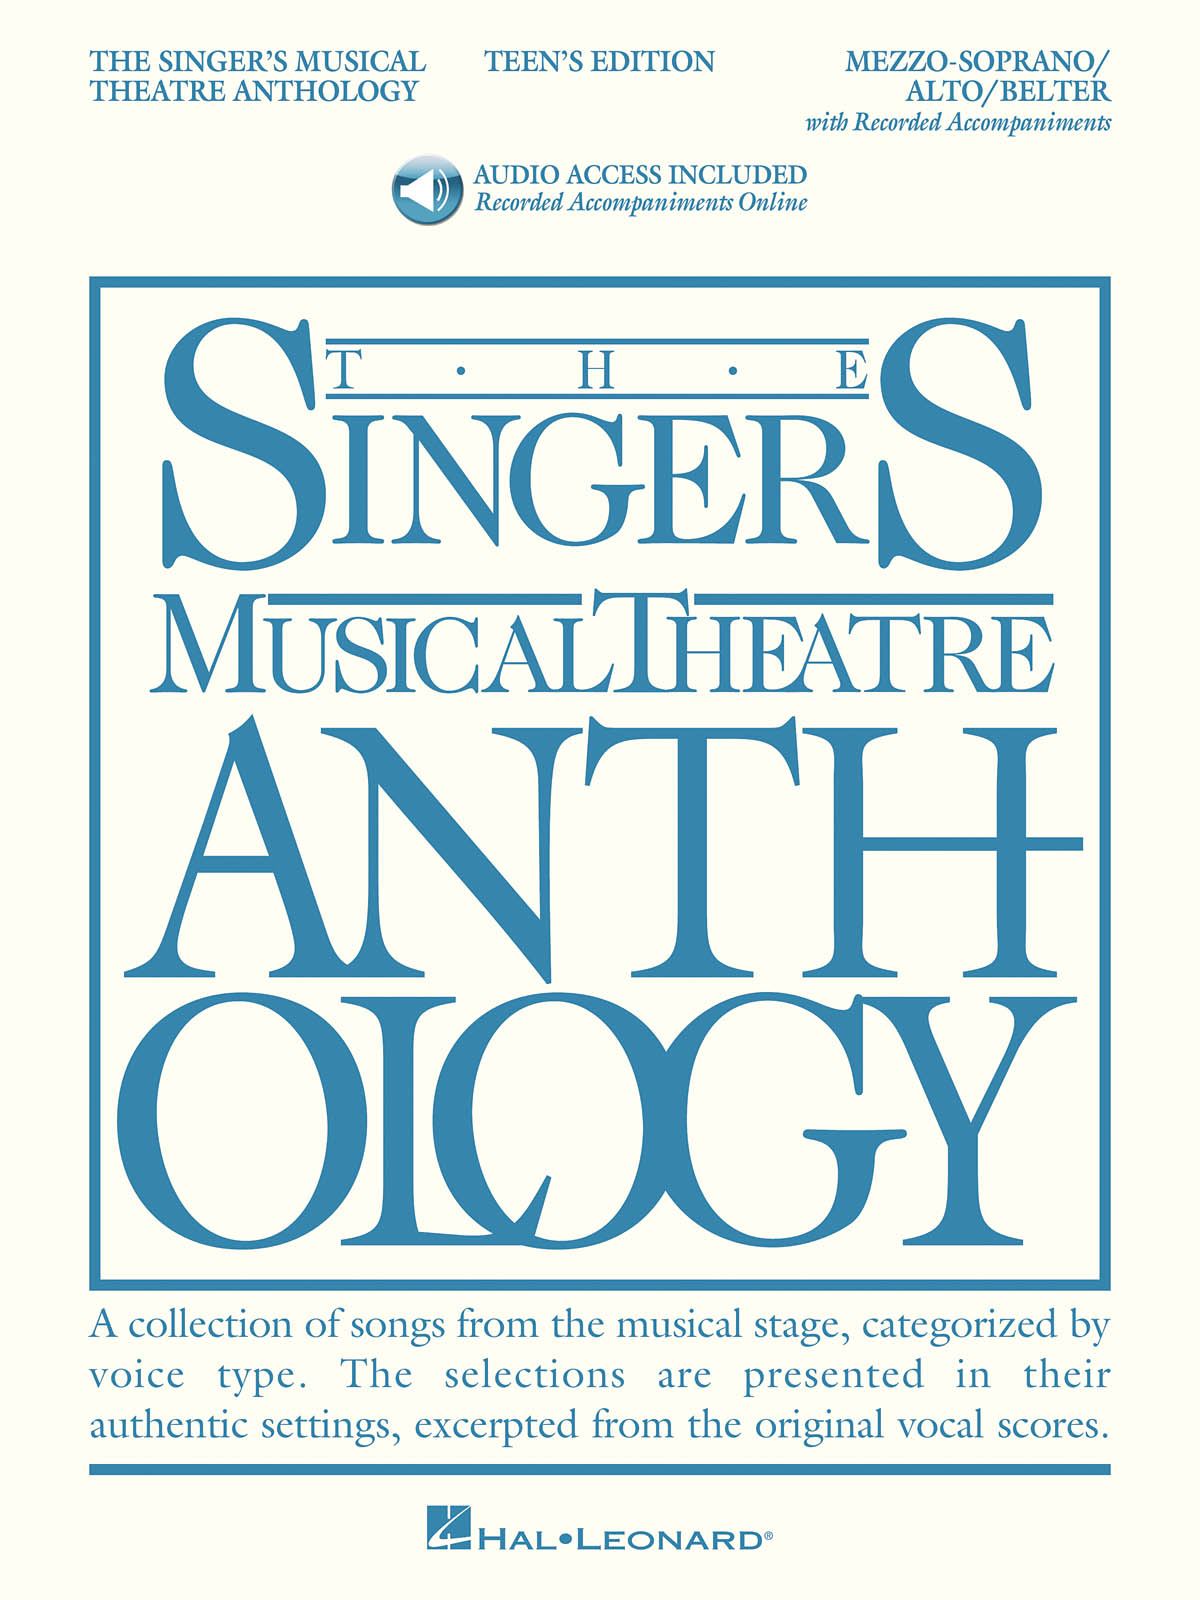 Singer's Musical Theatre Anthology - Teen's Ed.: Vocal and Piano: Vocal Album